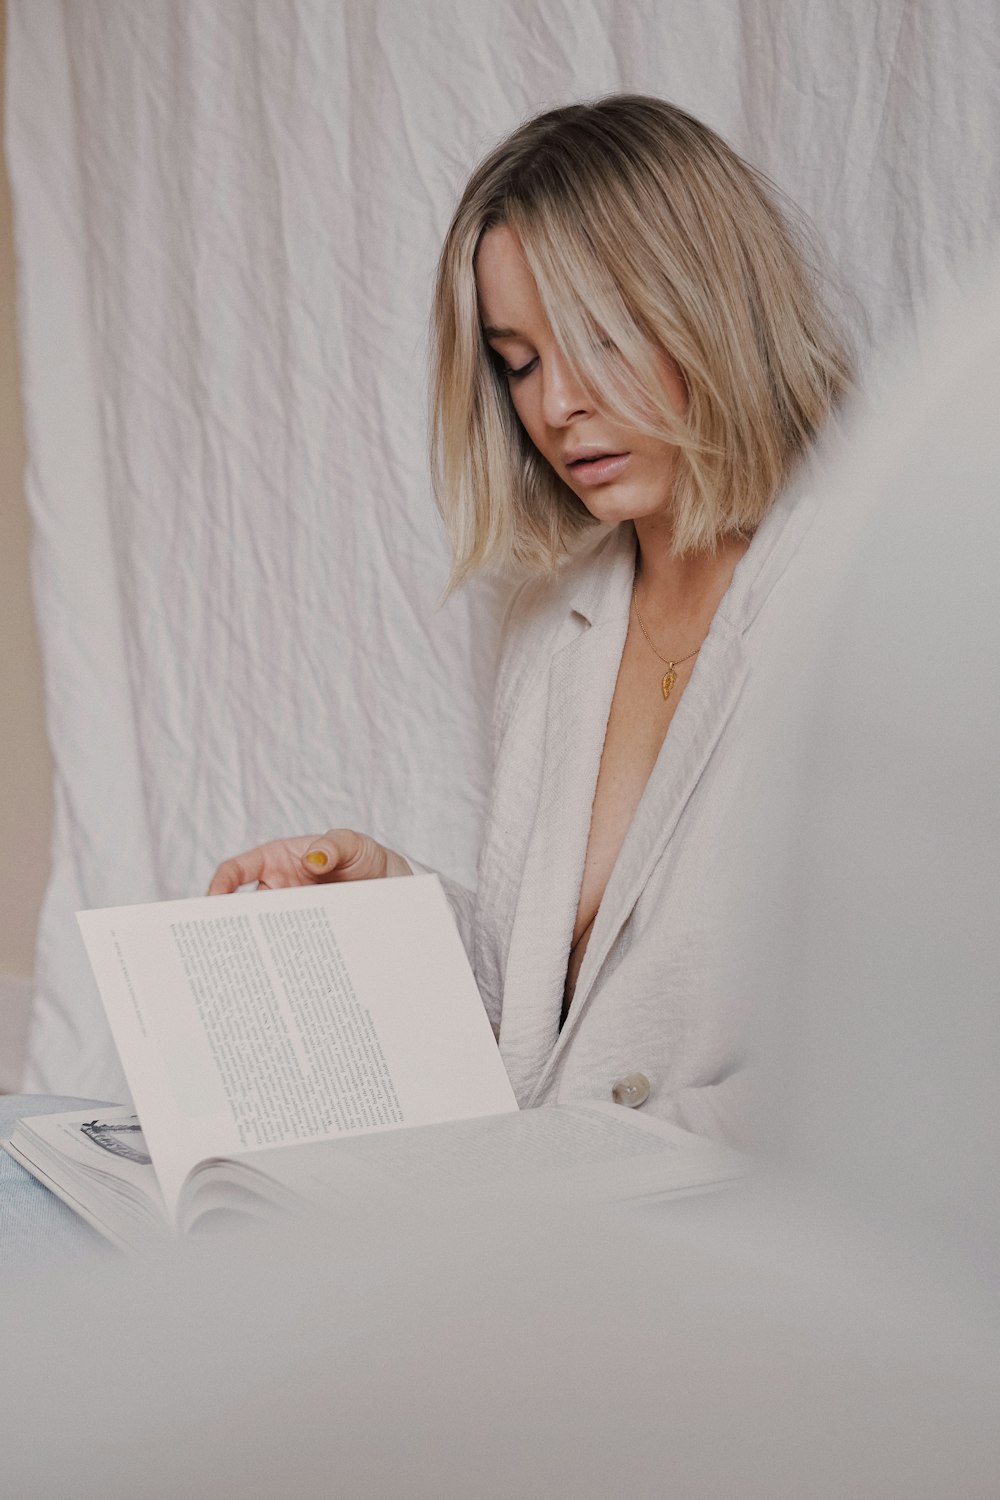 woman in white robe reading book